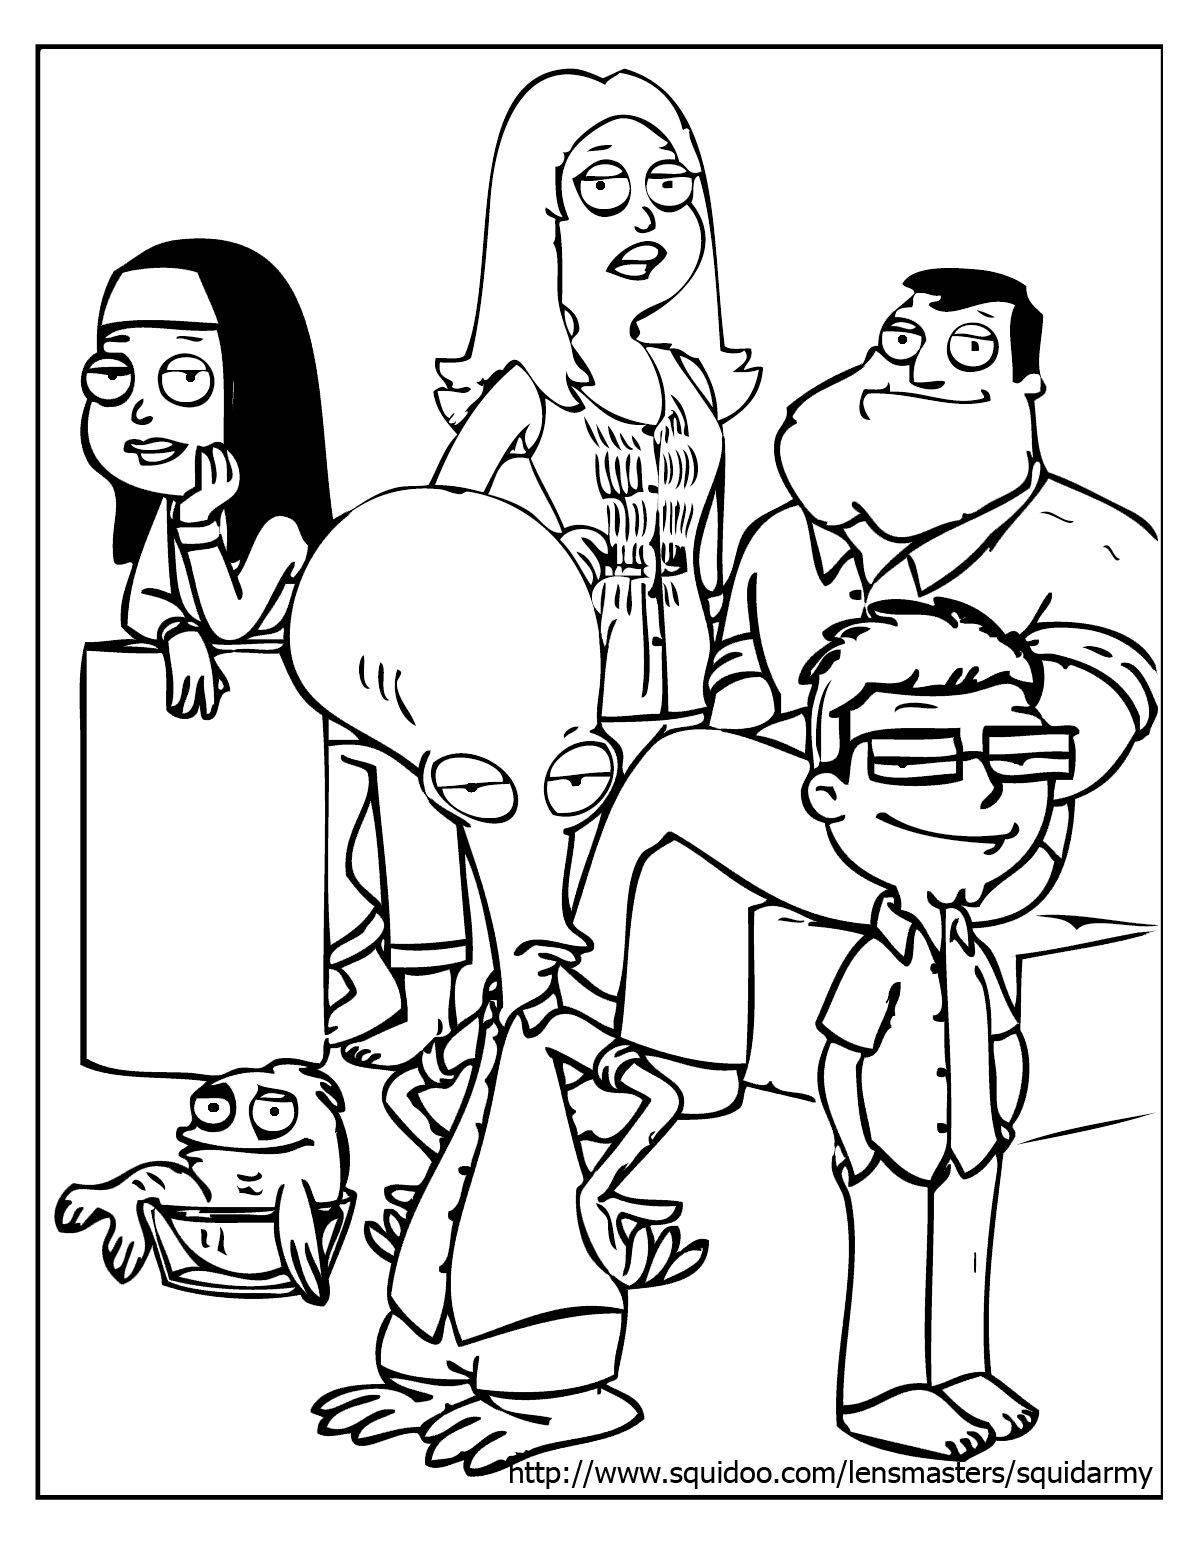 The Incredible Addams Family coloring pages for kids